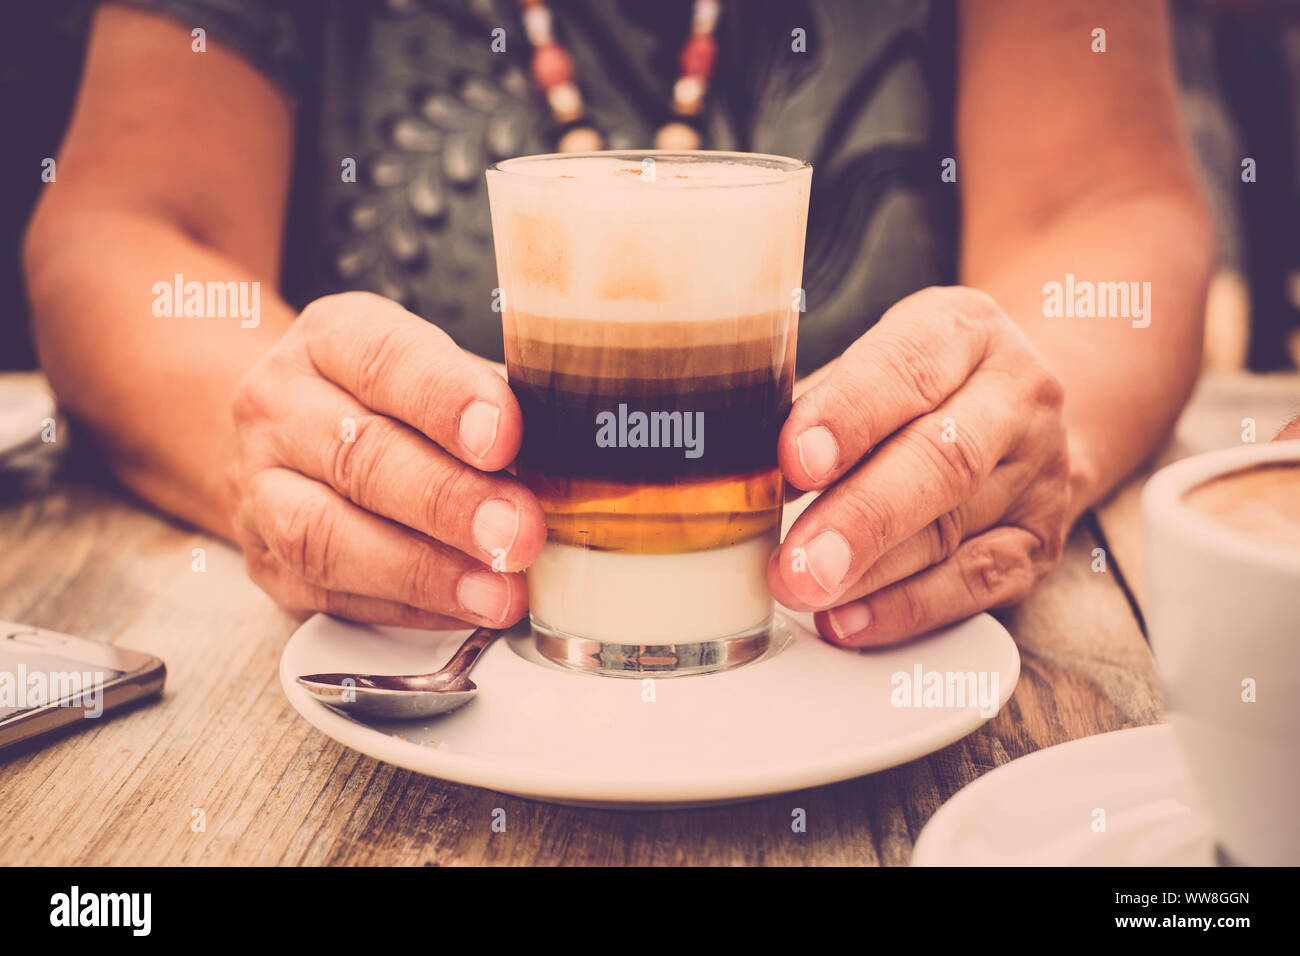 Close-up of hands with transparent glass of coffee and wooden table Stock Photo